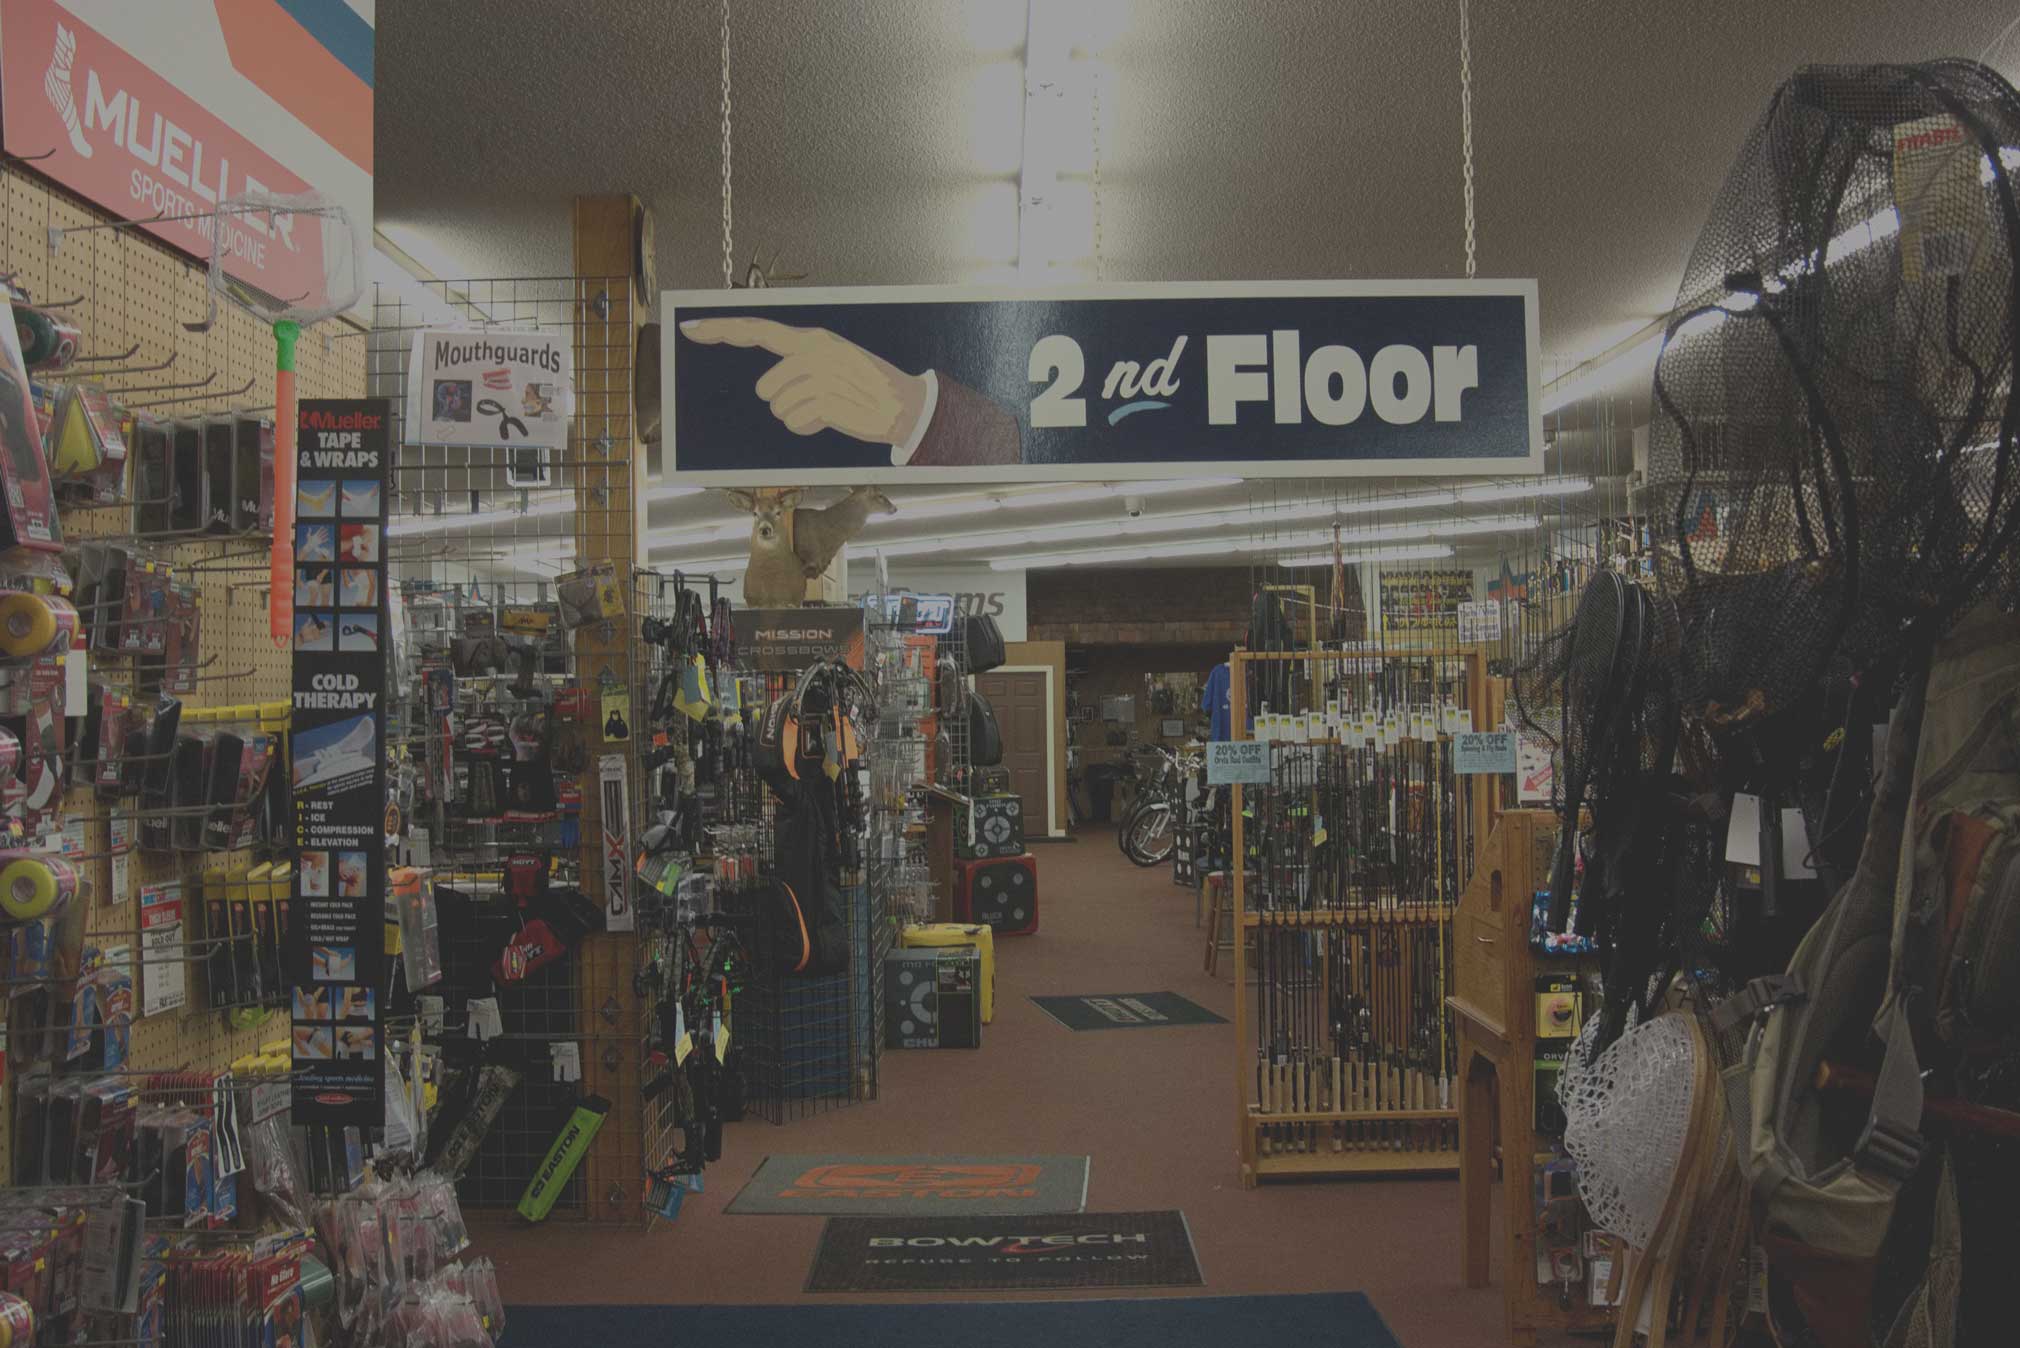 Store with 2nd floor sign